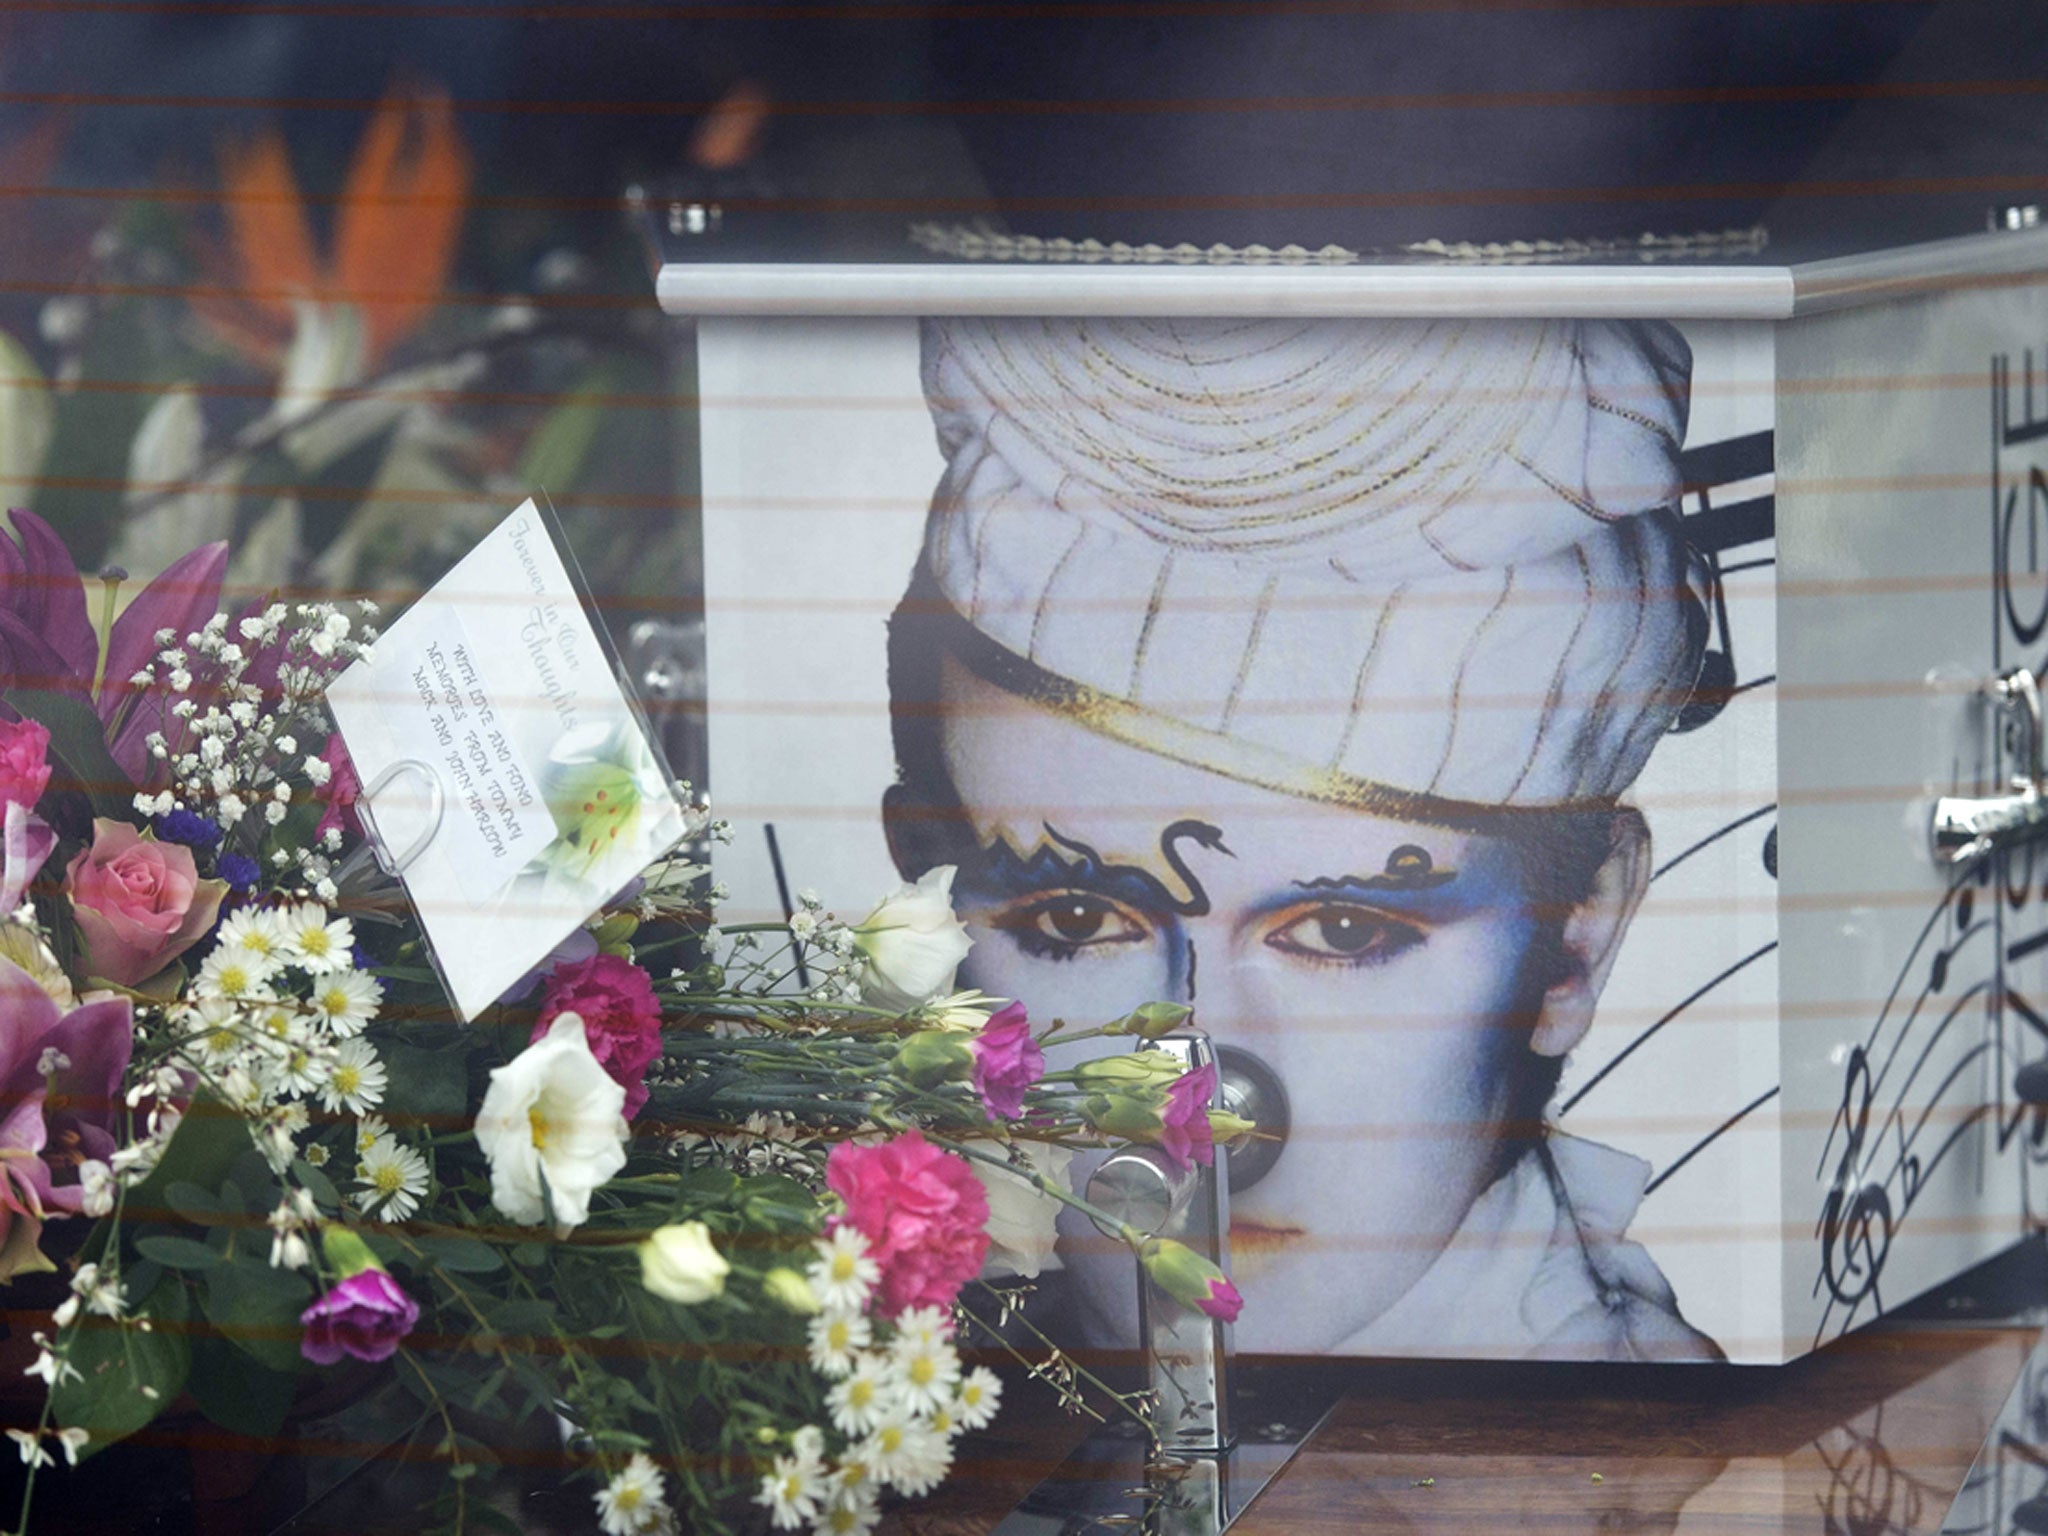 The coffin of Visage star Steve Strange at All Saints Church on 12 March, 2015, in Porthcawl, Wales